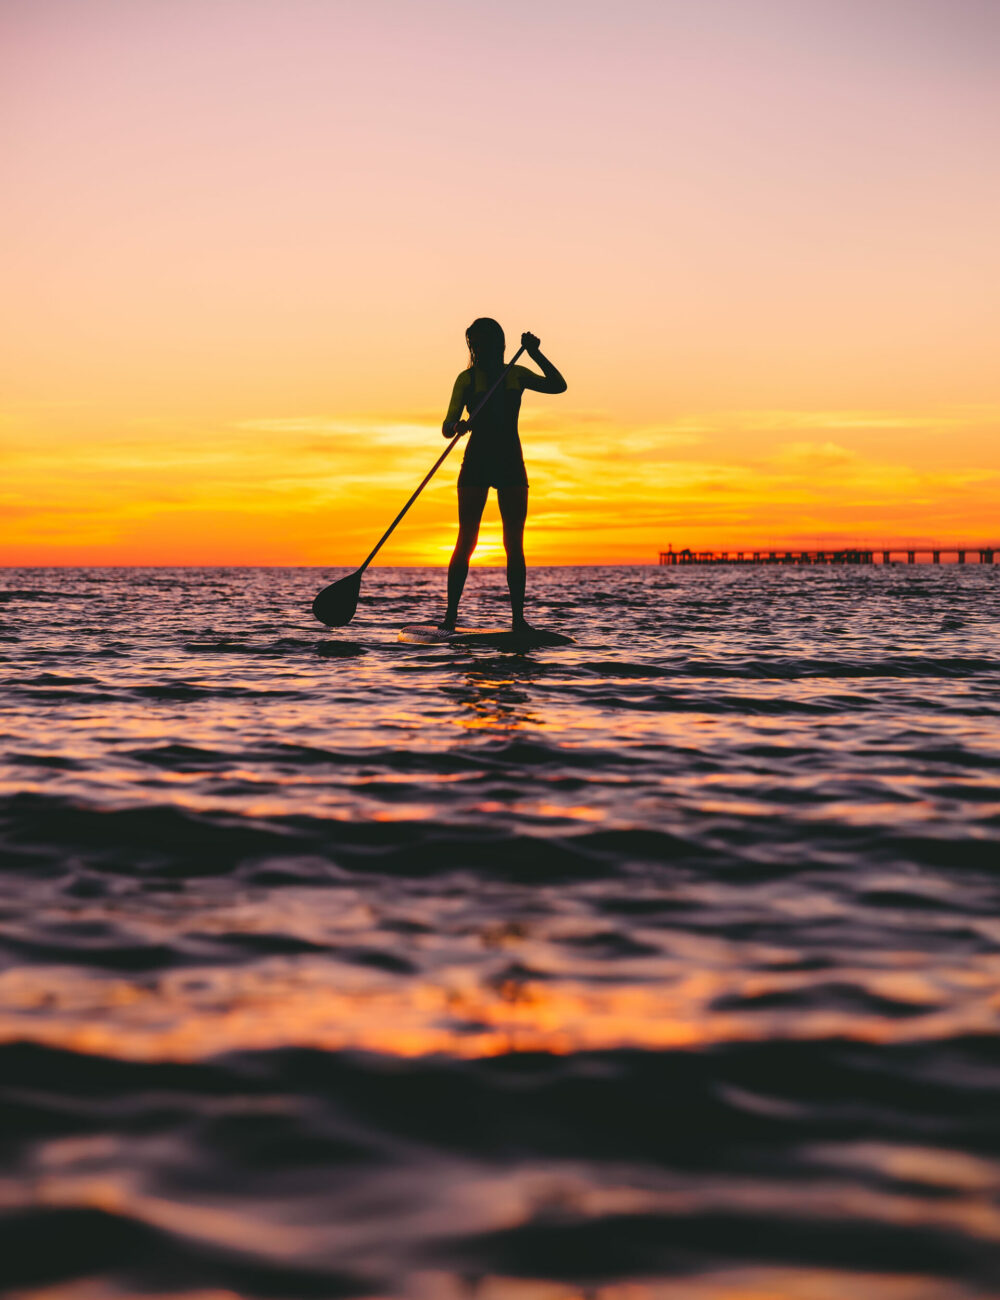 Woman stand up paddle boarding at dusk on a flat warm quiet sea with beautiful sunset colors